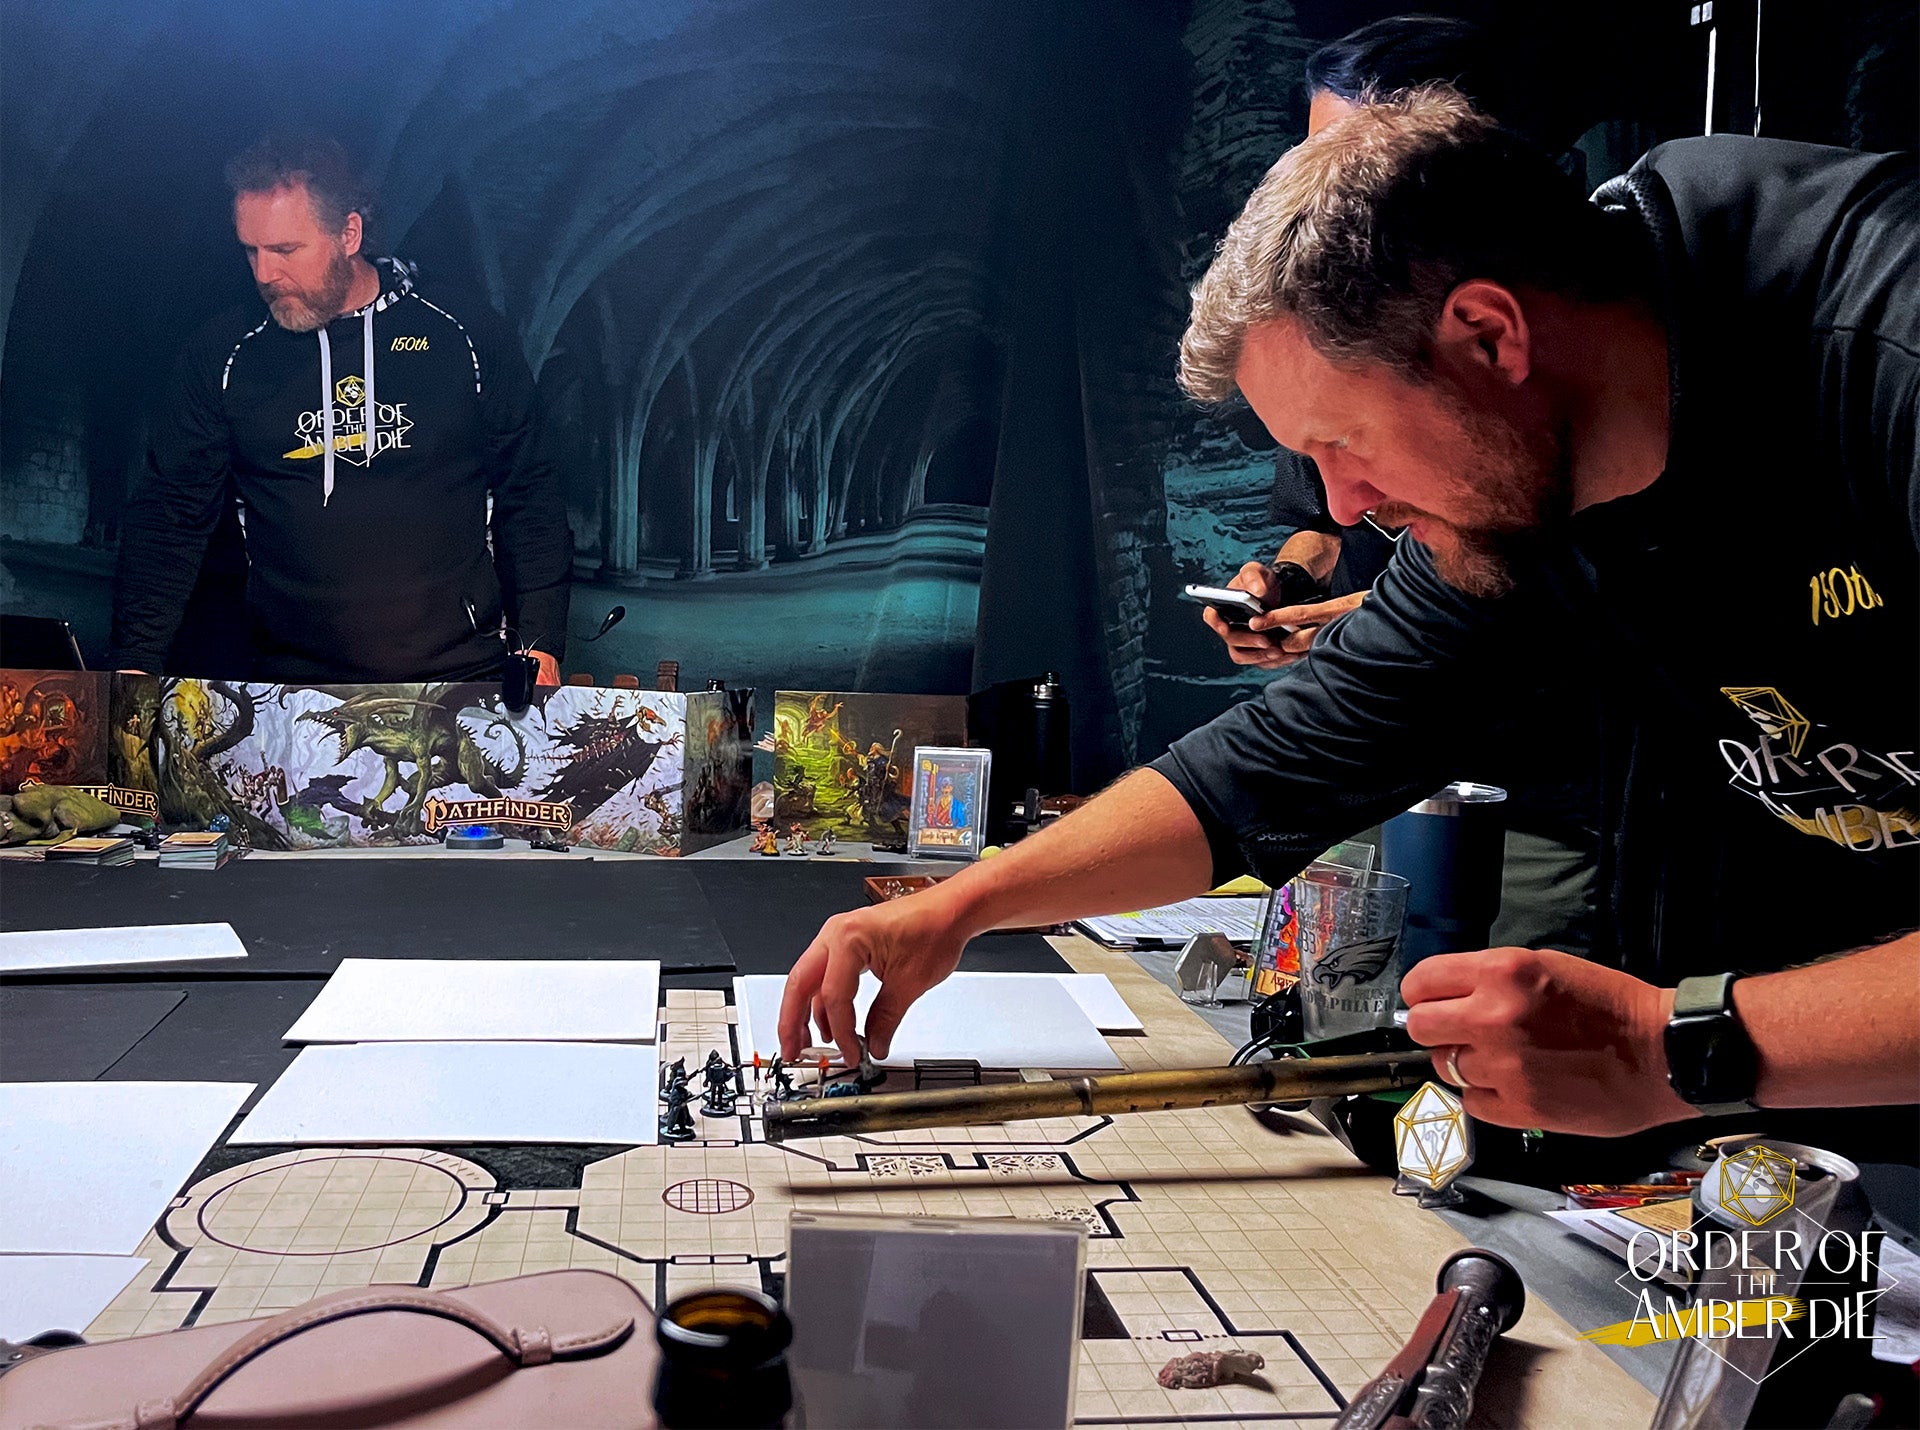 Order of the Amber Die: Players sitting and standing around a gaming table with a covered map